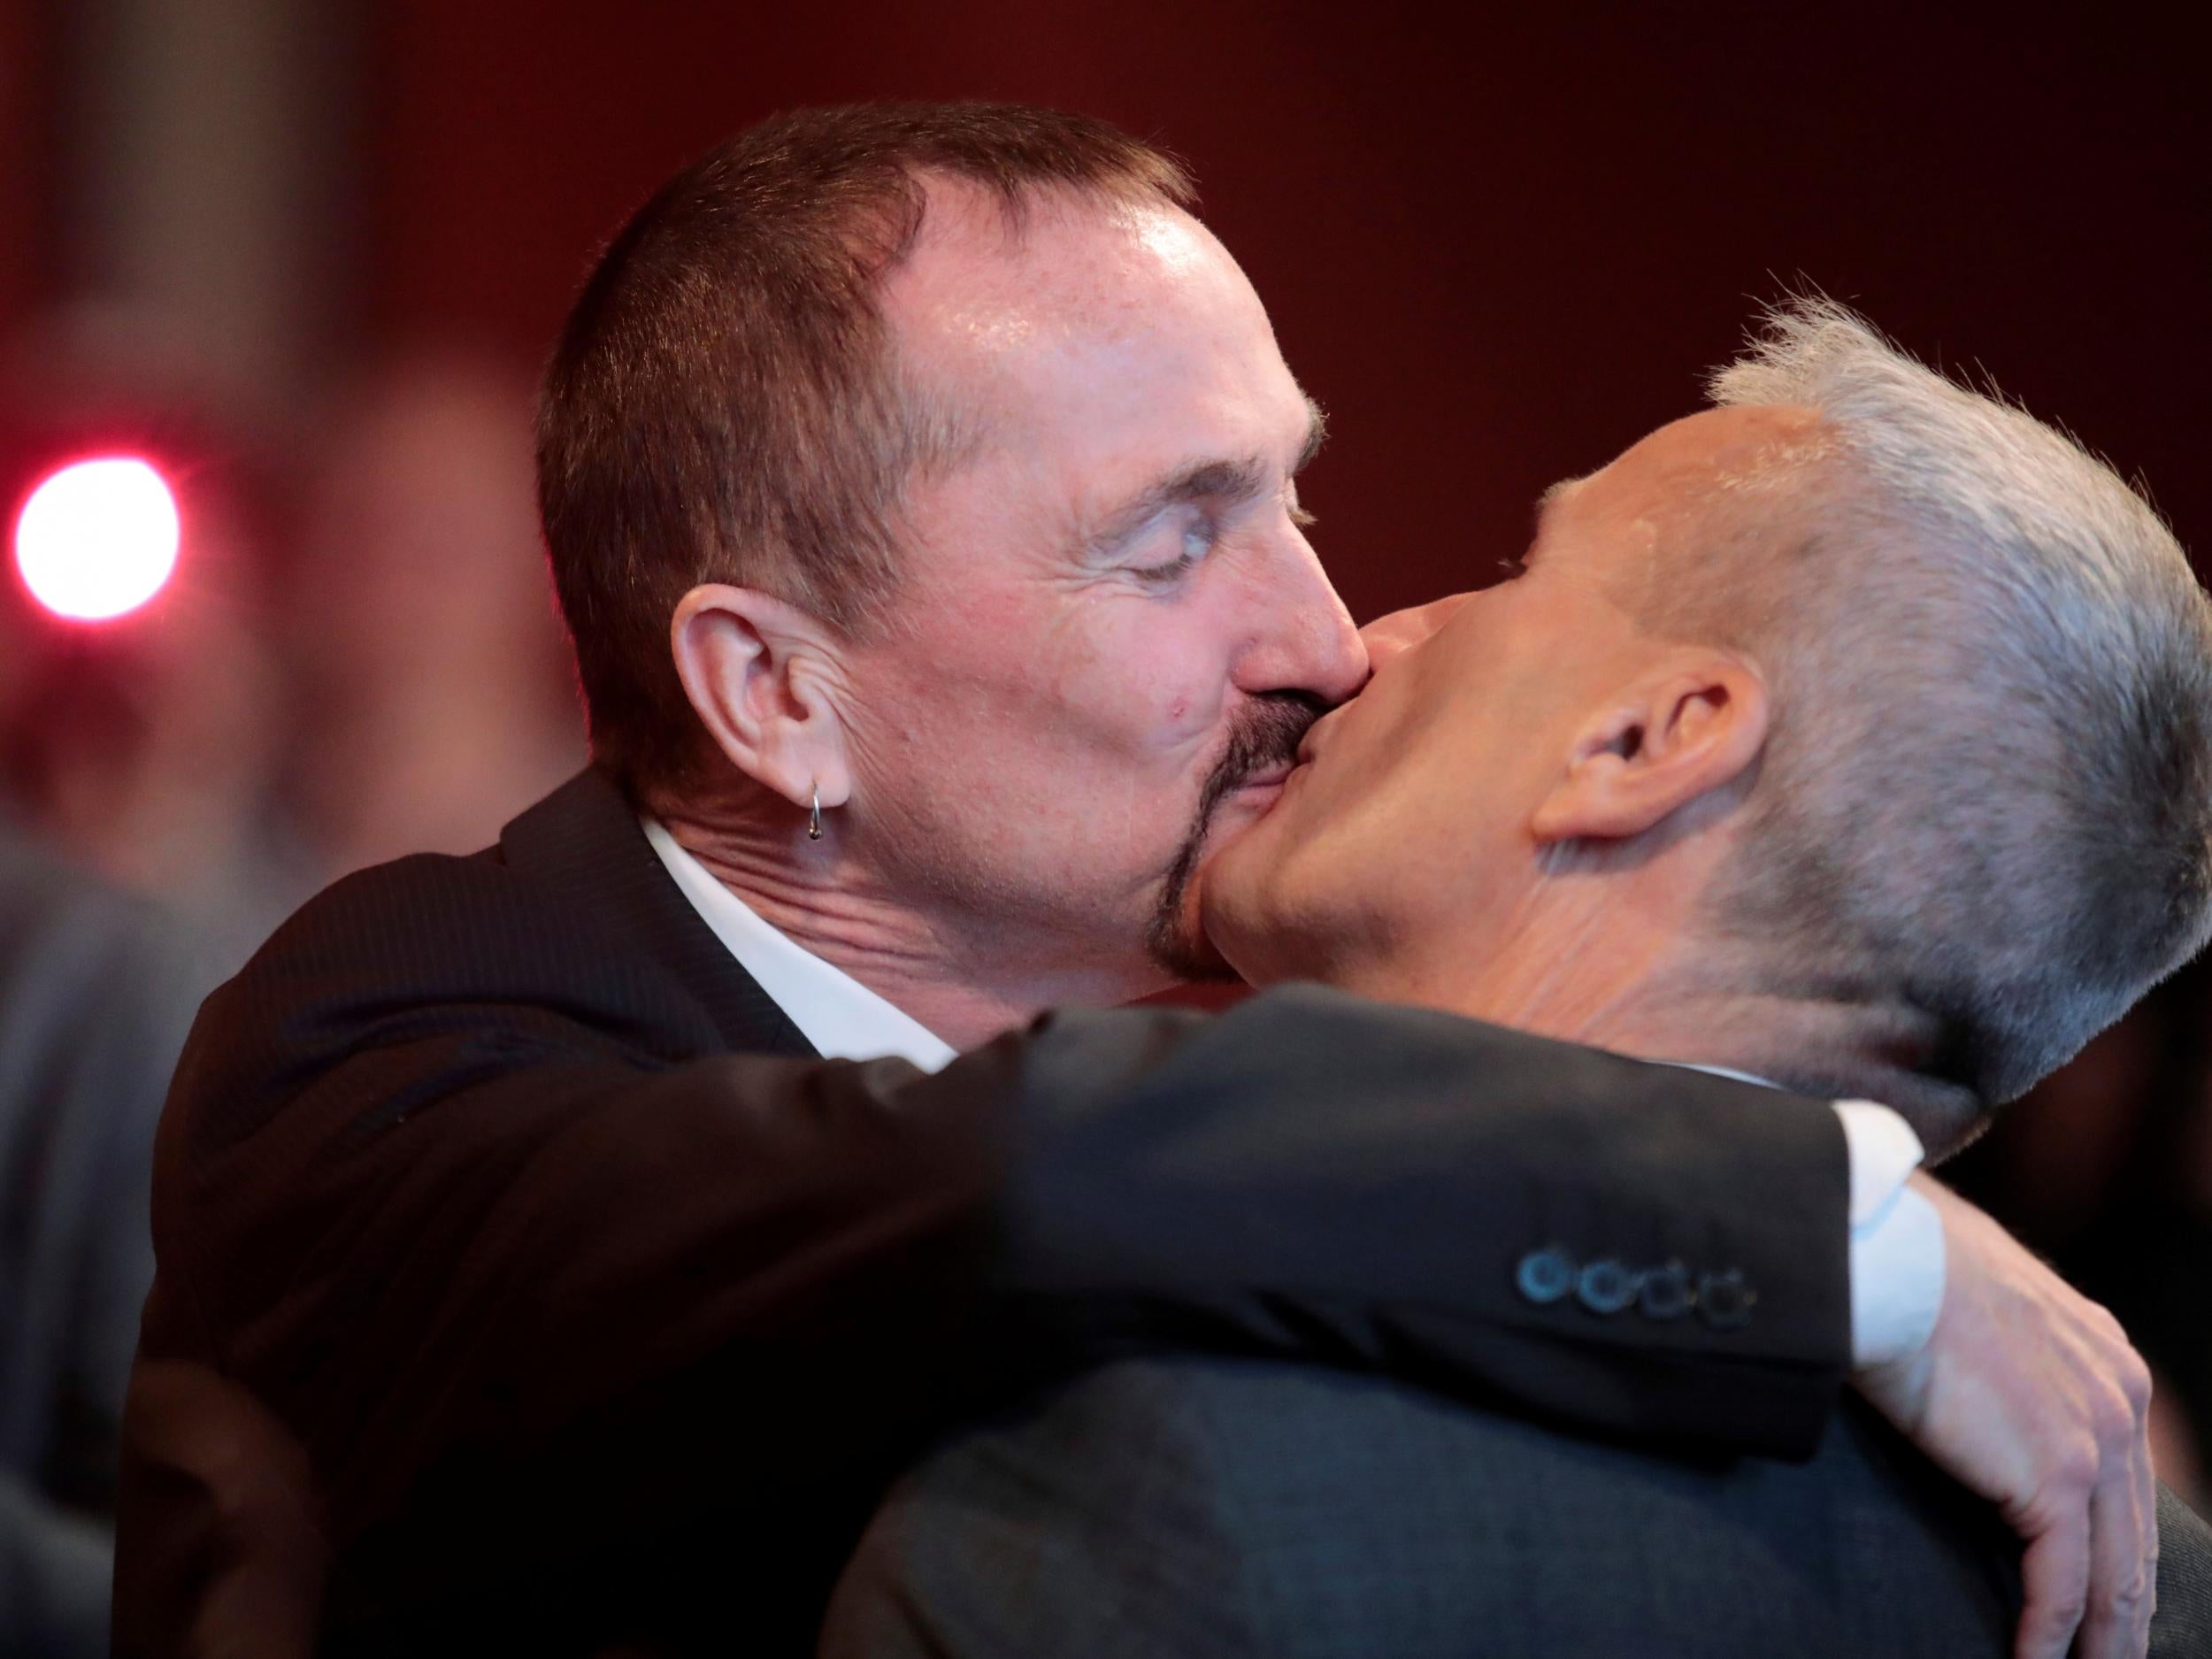 Germany celebrates first gay wedding after historic parliamentary vote The Independent The Independent picture